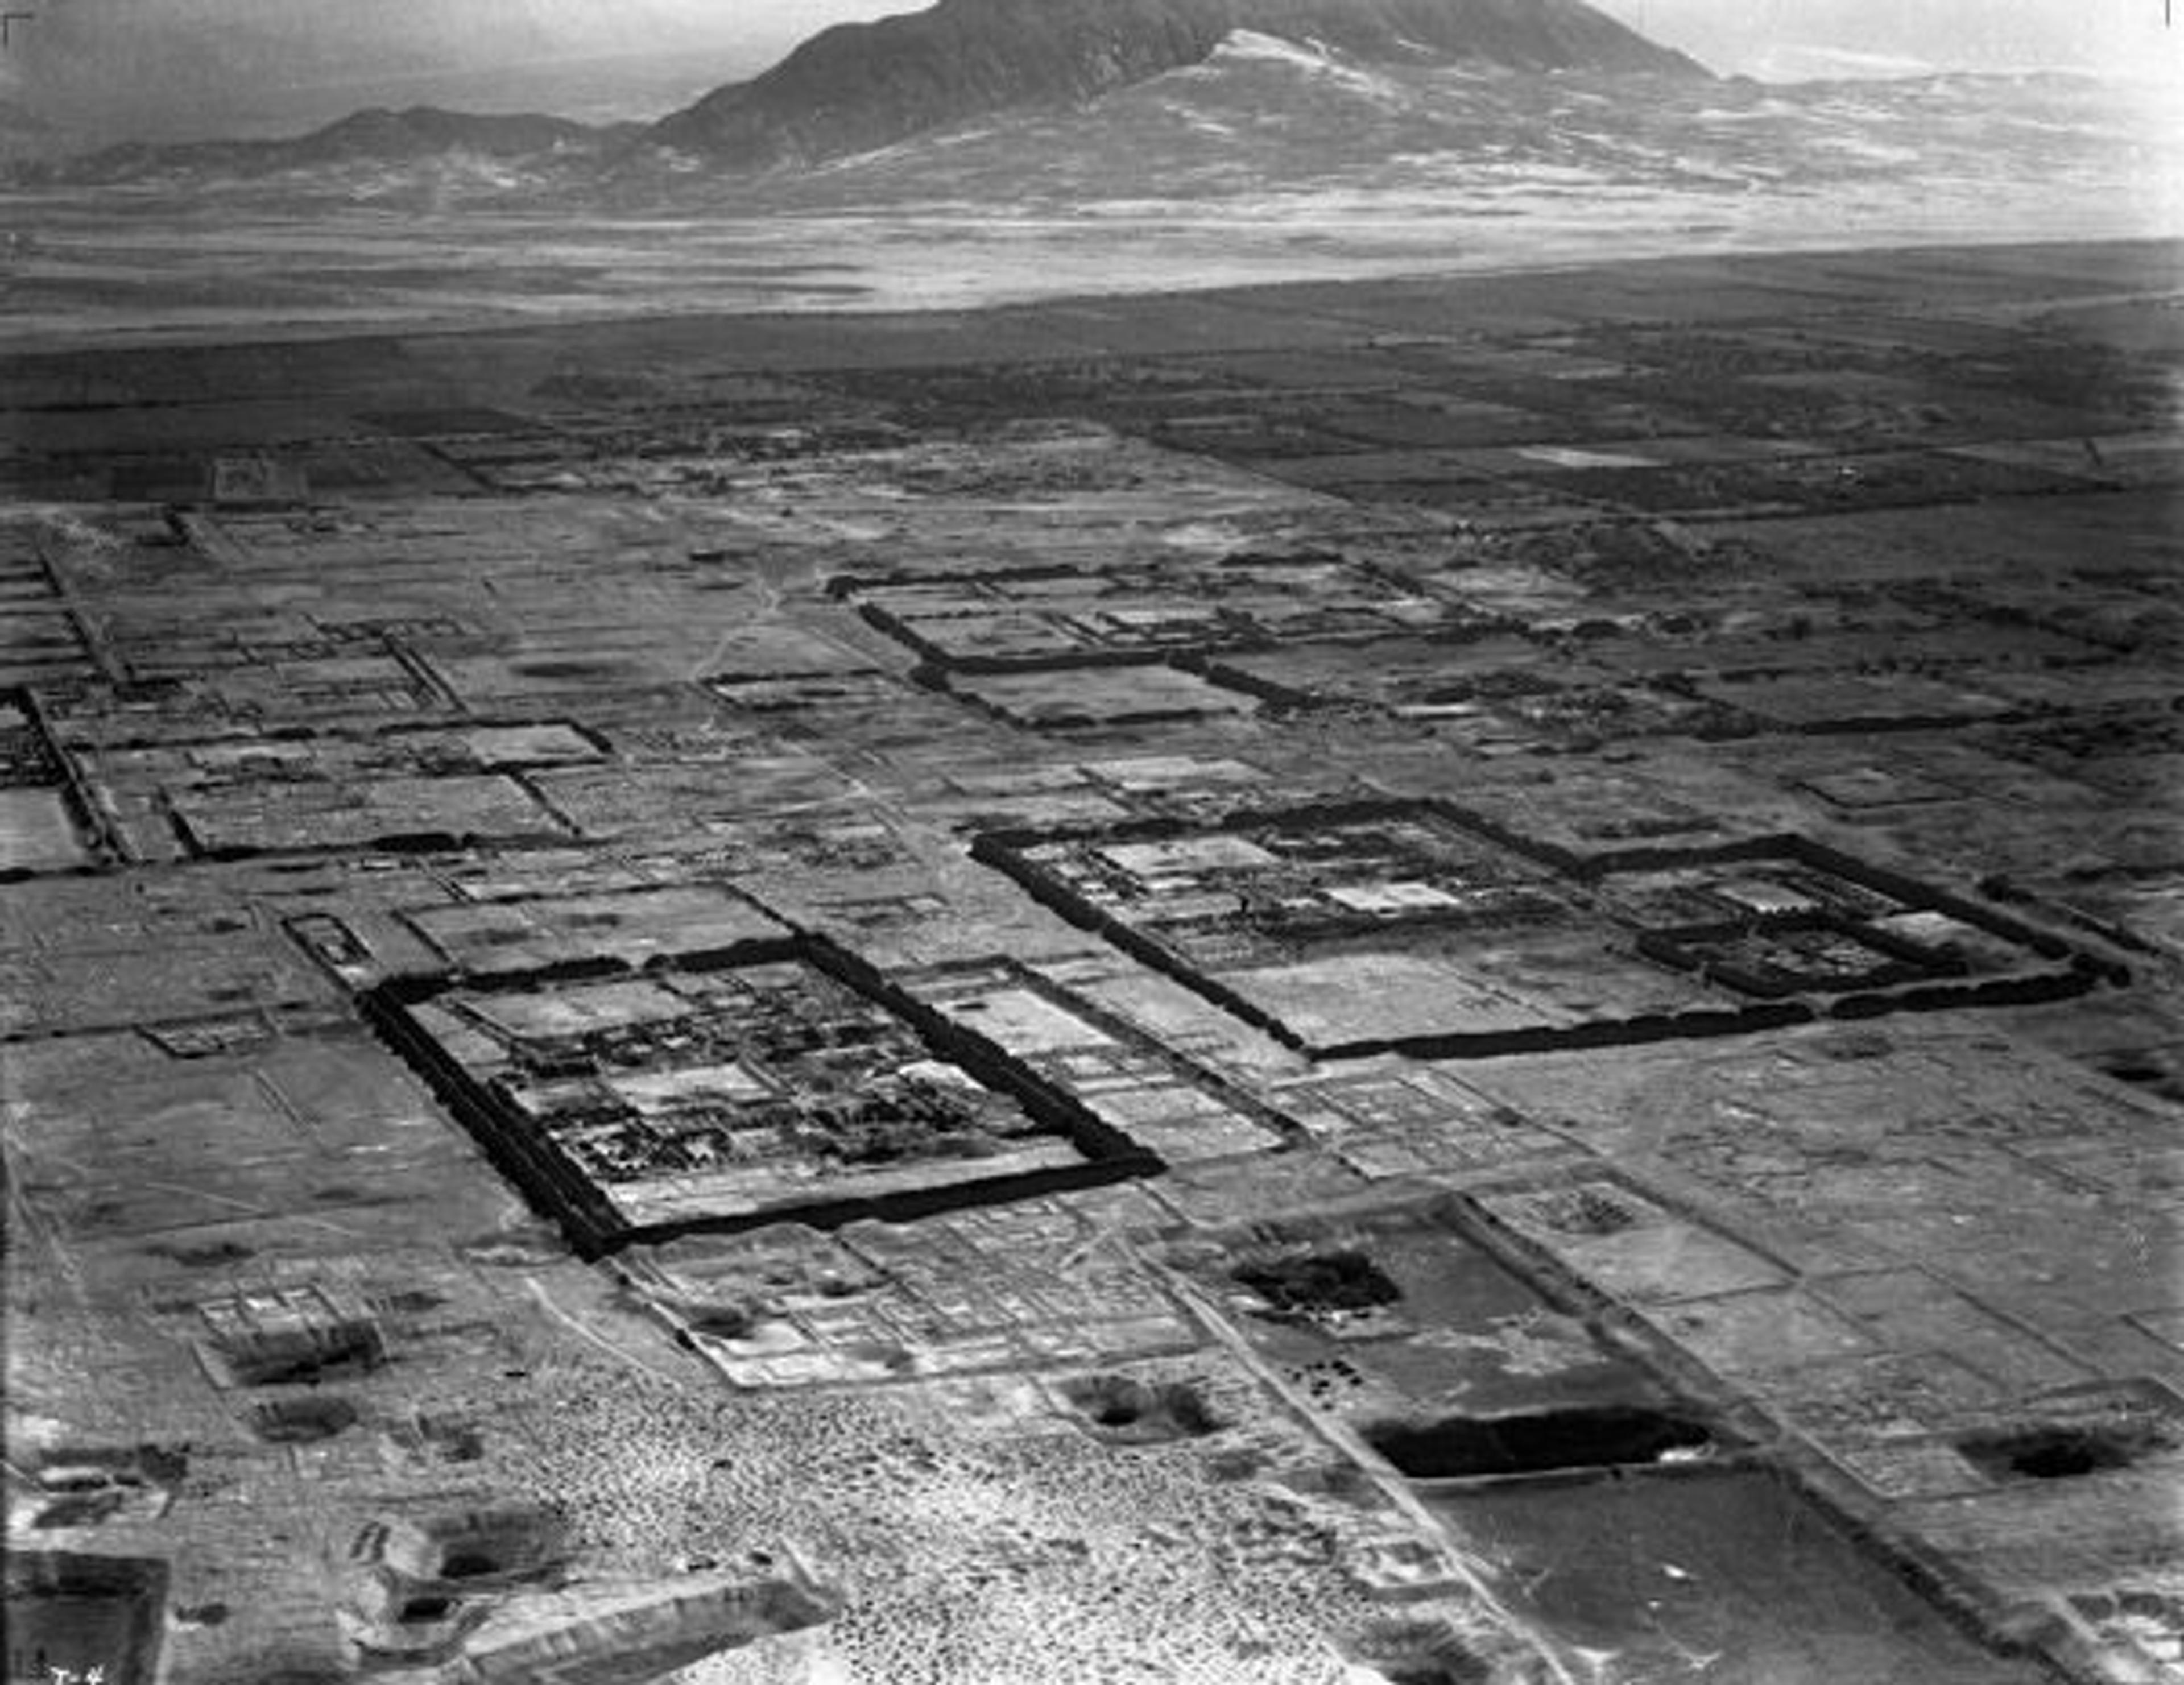 Aerial view of Chan Chan, Peru, 1931. The large enclosures were the palaces of Chimú kings. Photograph by Robert Shippee and George R. Johnson. Image courtesy of the American Museum of Natural History